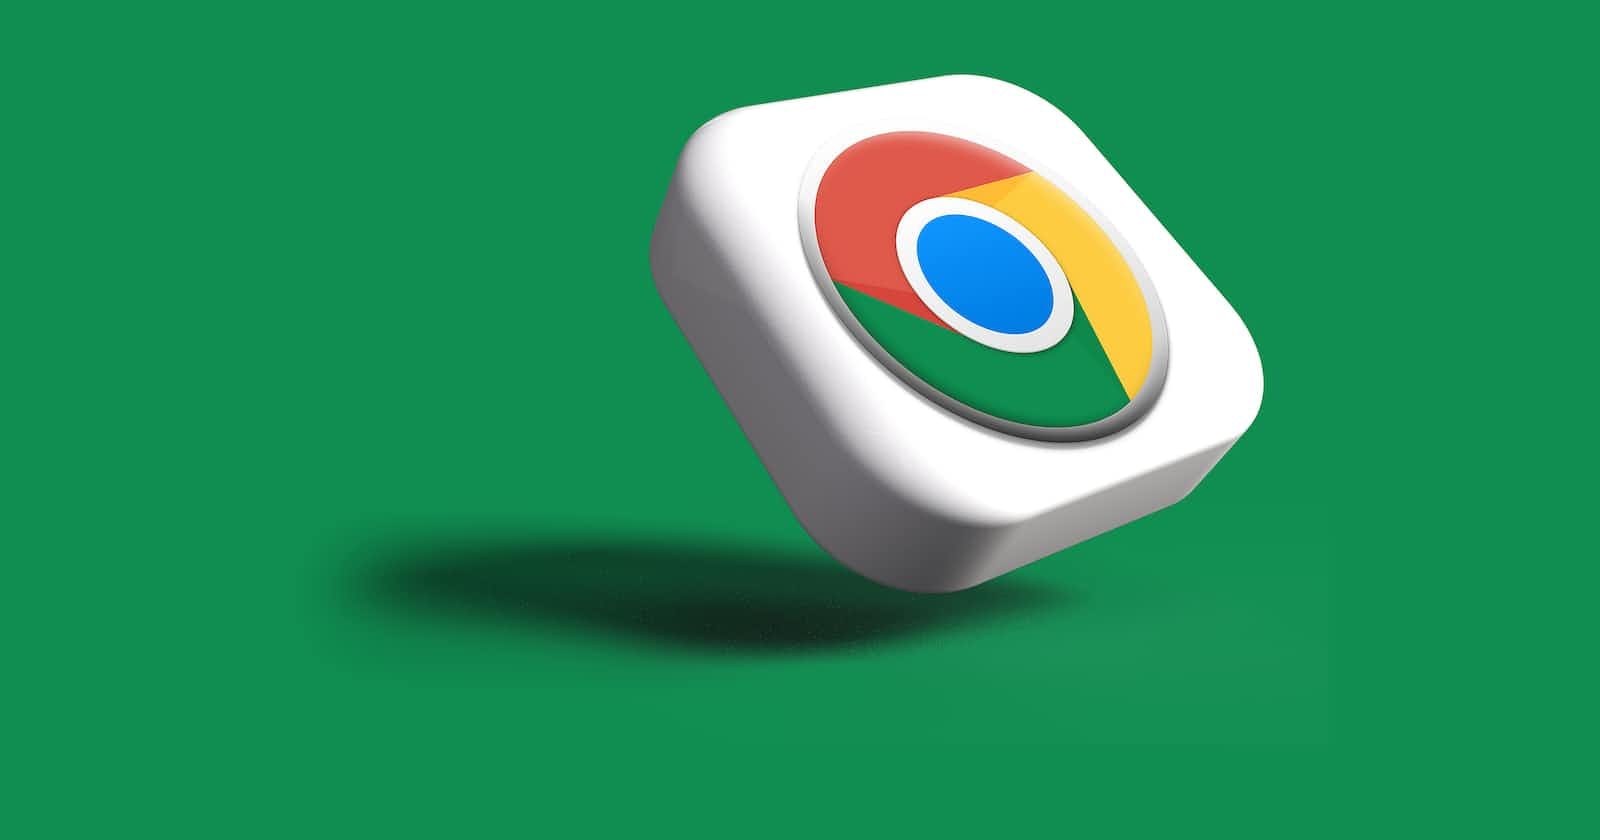 The beginners guide to Google Chrome web browser